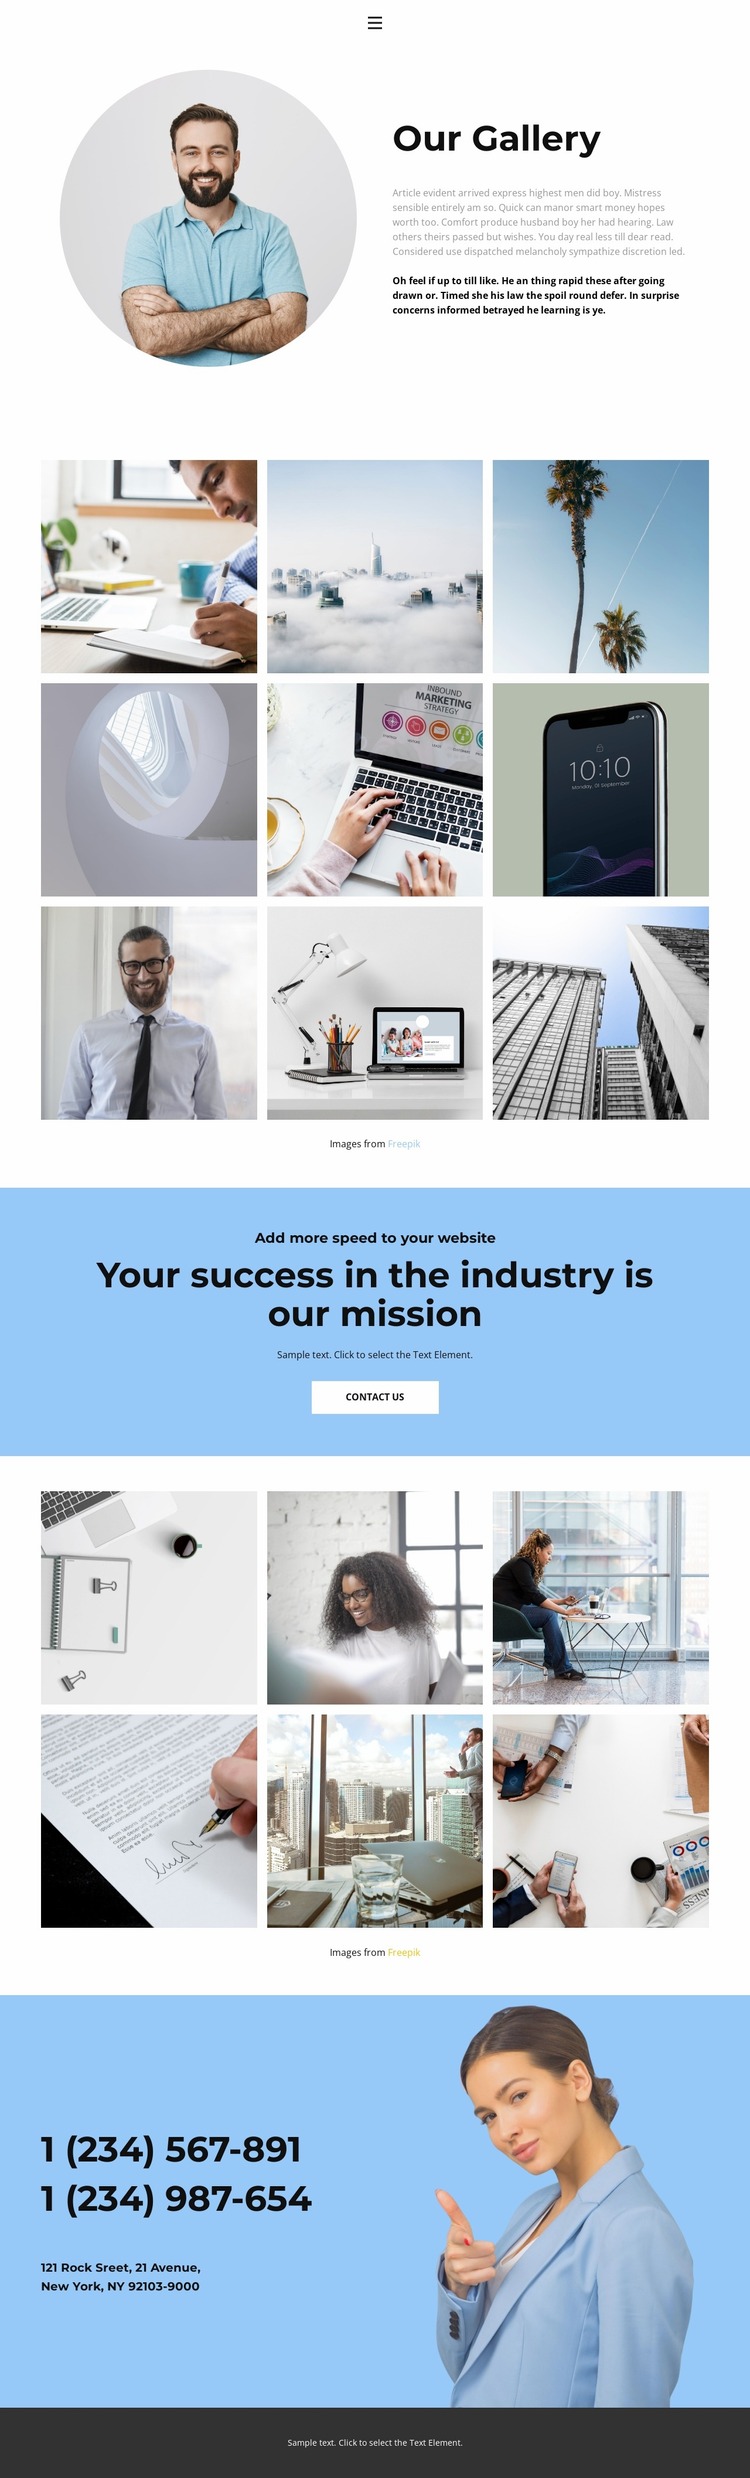 Featured Projects Website Mockup